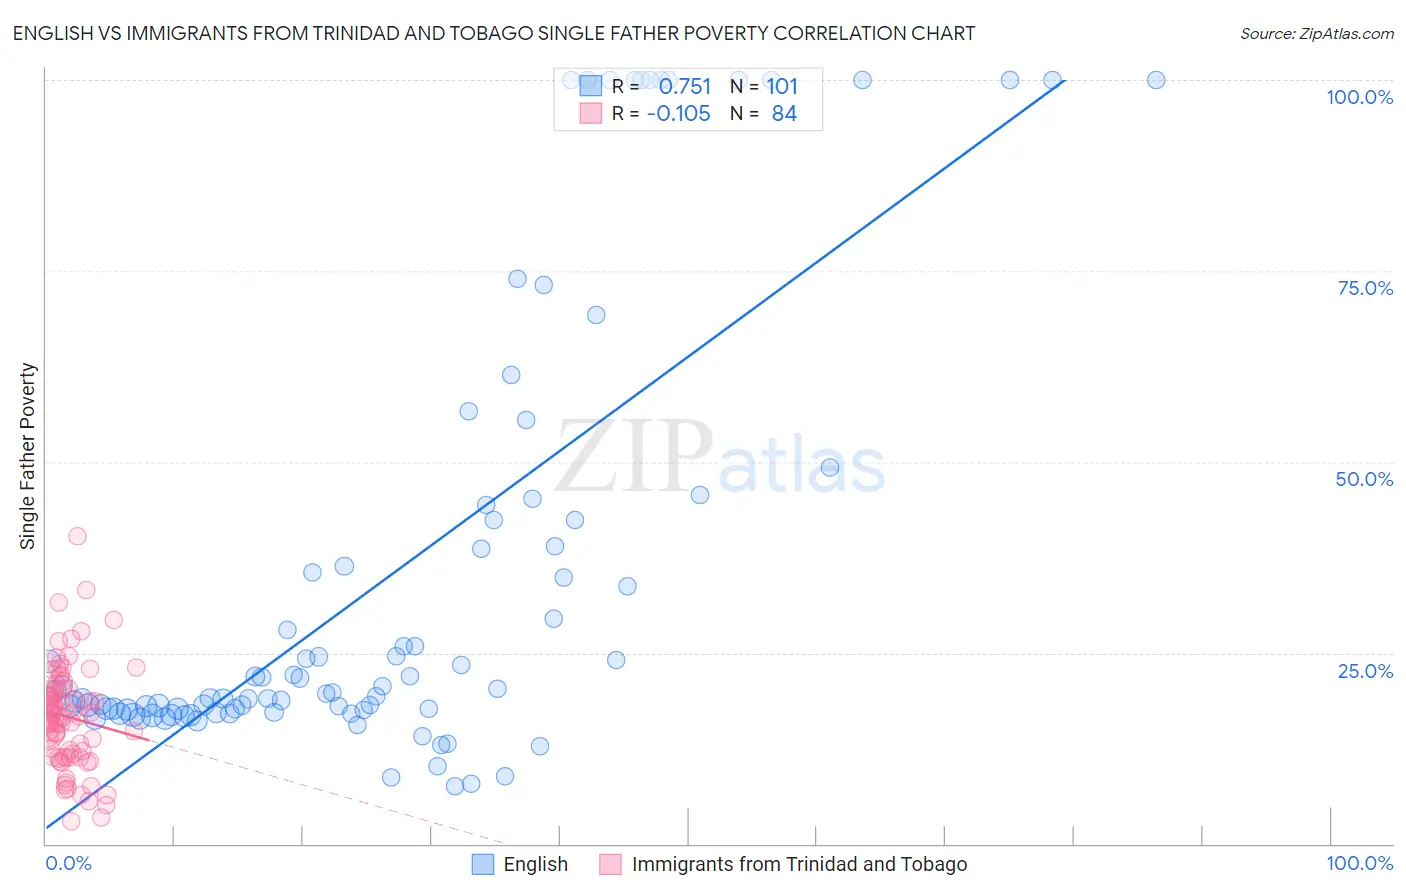 English vs Immigrants from Trinidad and Tobago Single Father Poverty